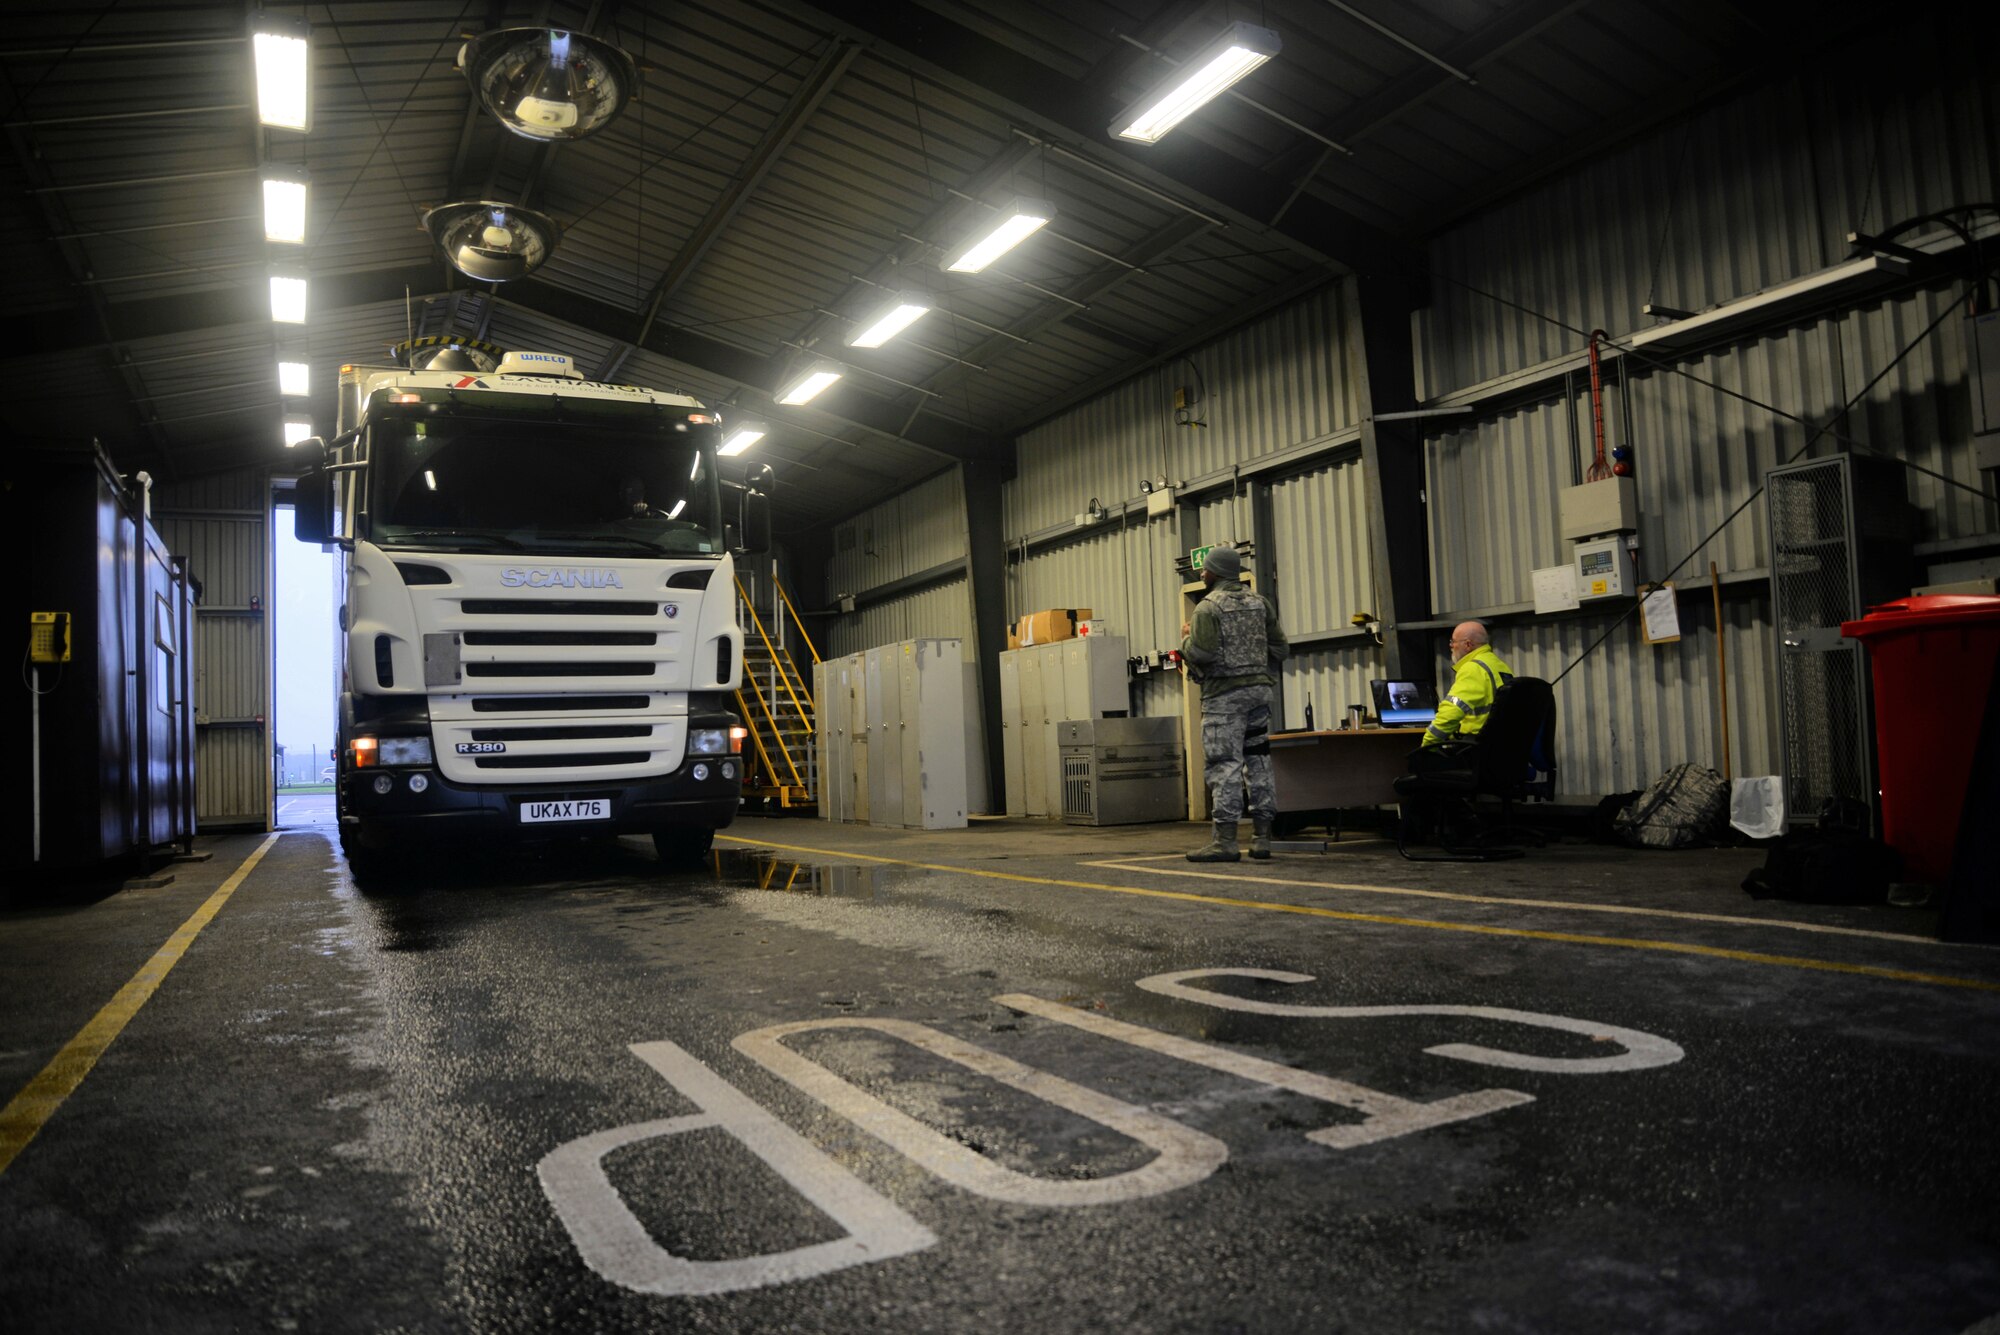 A truck enters the search barn for an inspection Dec. 15, 2015, on RAF Mildenhall, England. Airmen from the 100th Security Forces Squadron and Ministry of Defence Guard Service officers search vehicles for explosives, unauthorized people, contraband and illegal weapons. Both an armed Airman and a MGS civilian security officer are required to be in attendance during a vehicle inspection. (U.S. Air Force photo by Senior Airman Christine Halan/Released)